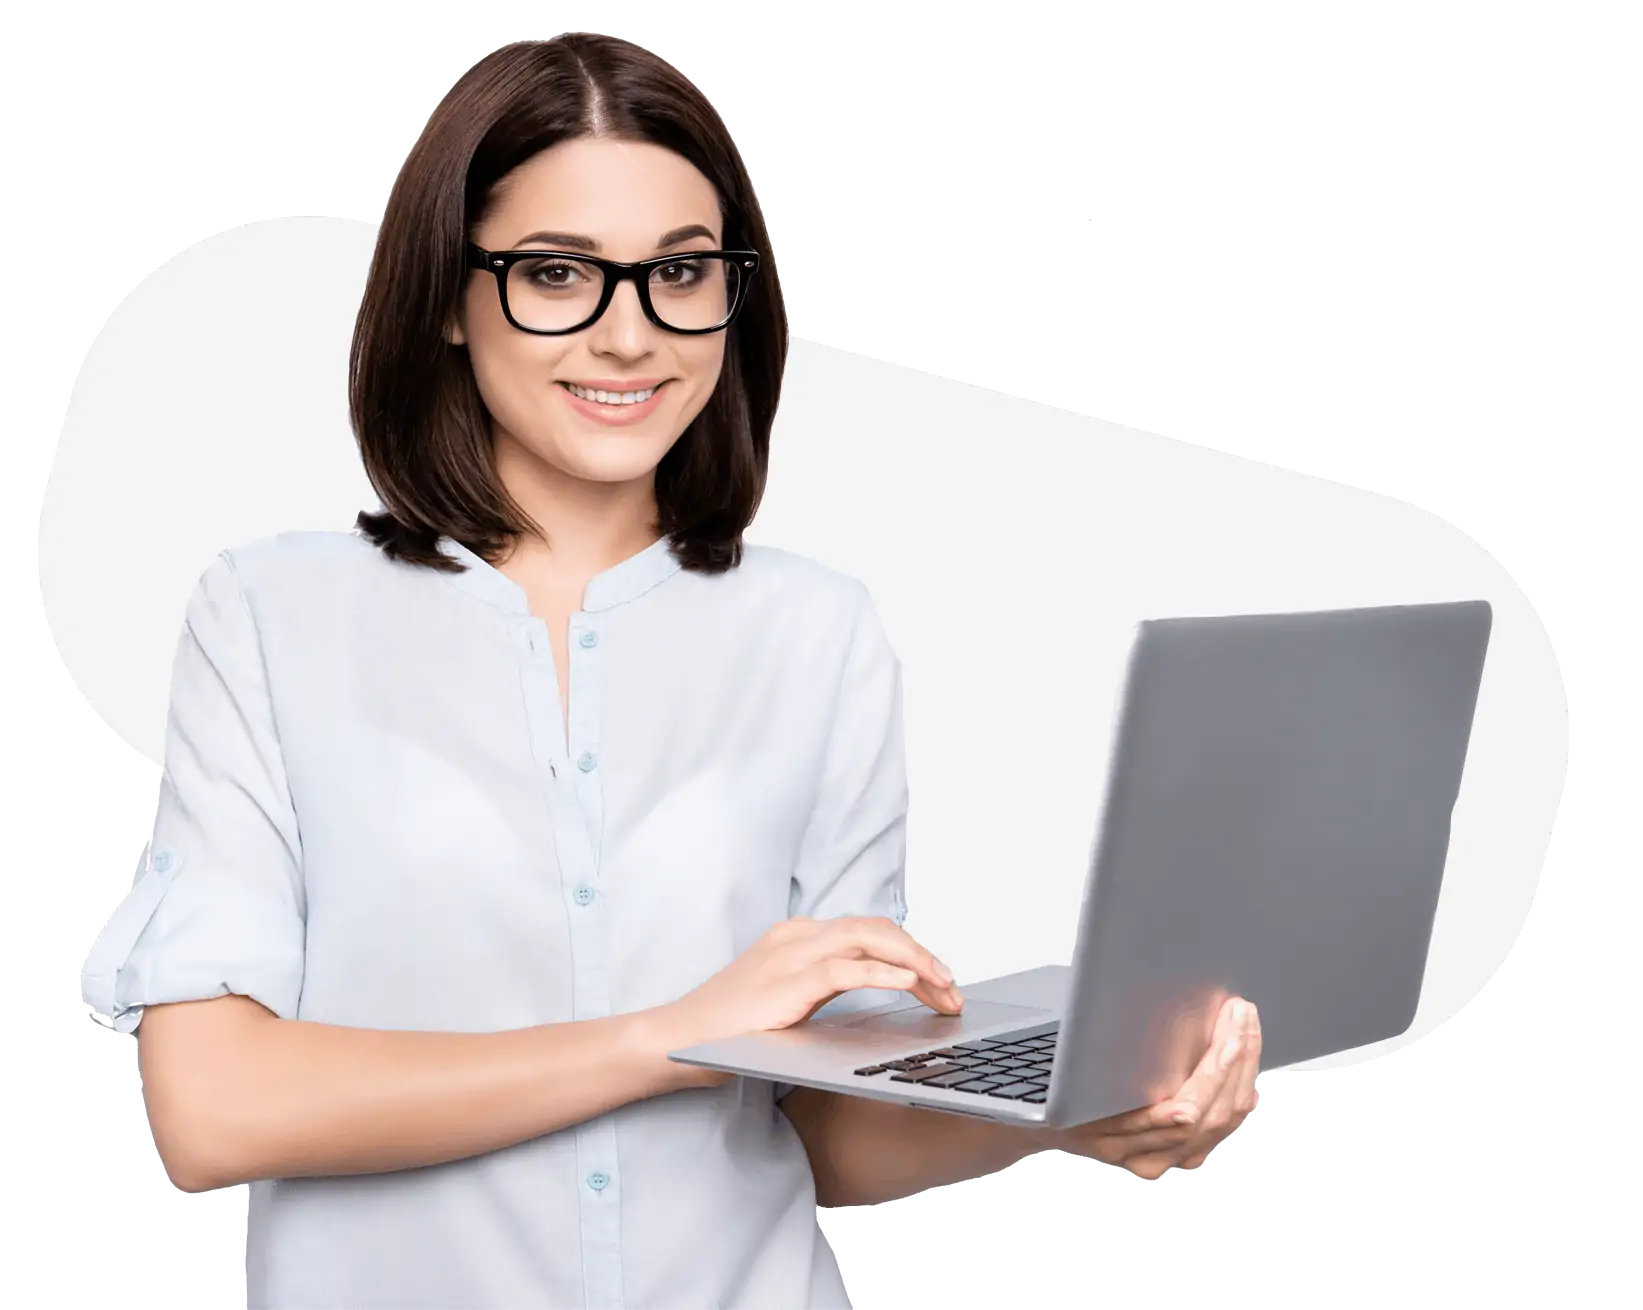 woman wearing glasses and a shirt holding a silver laptop